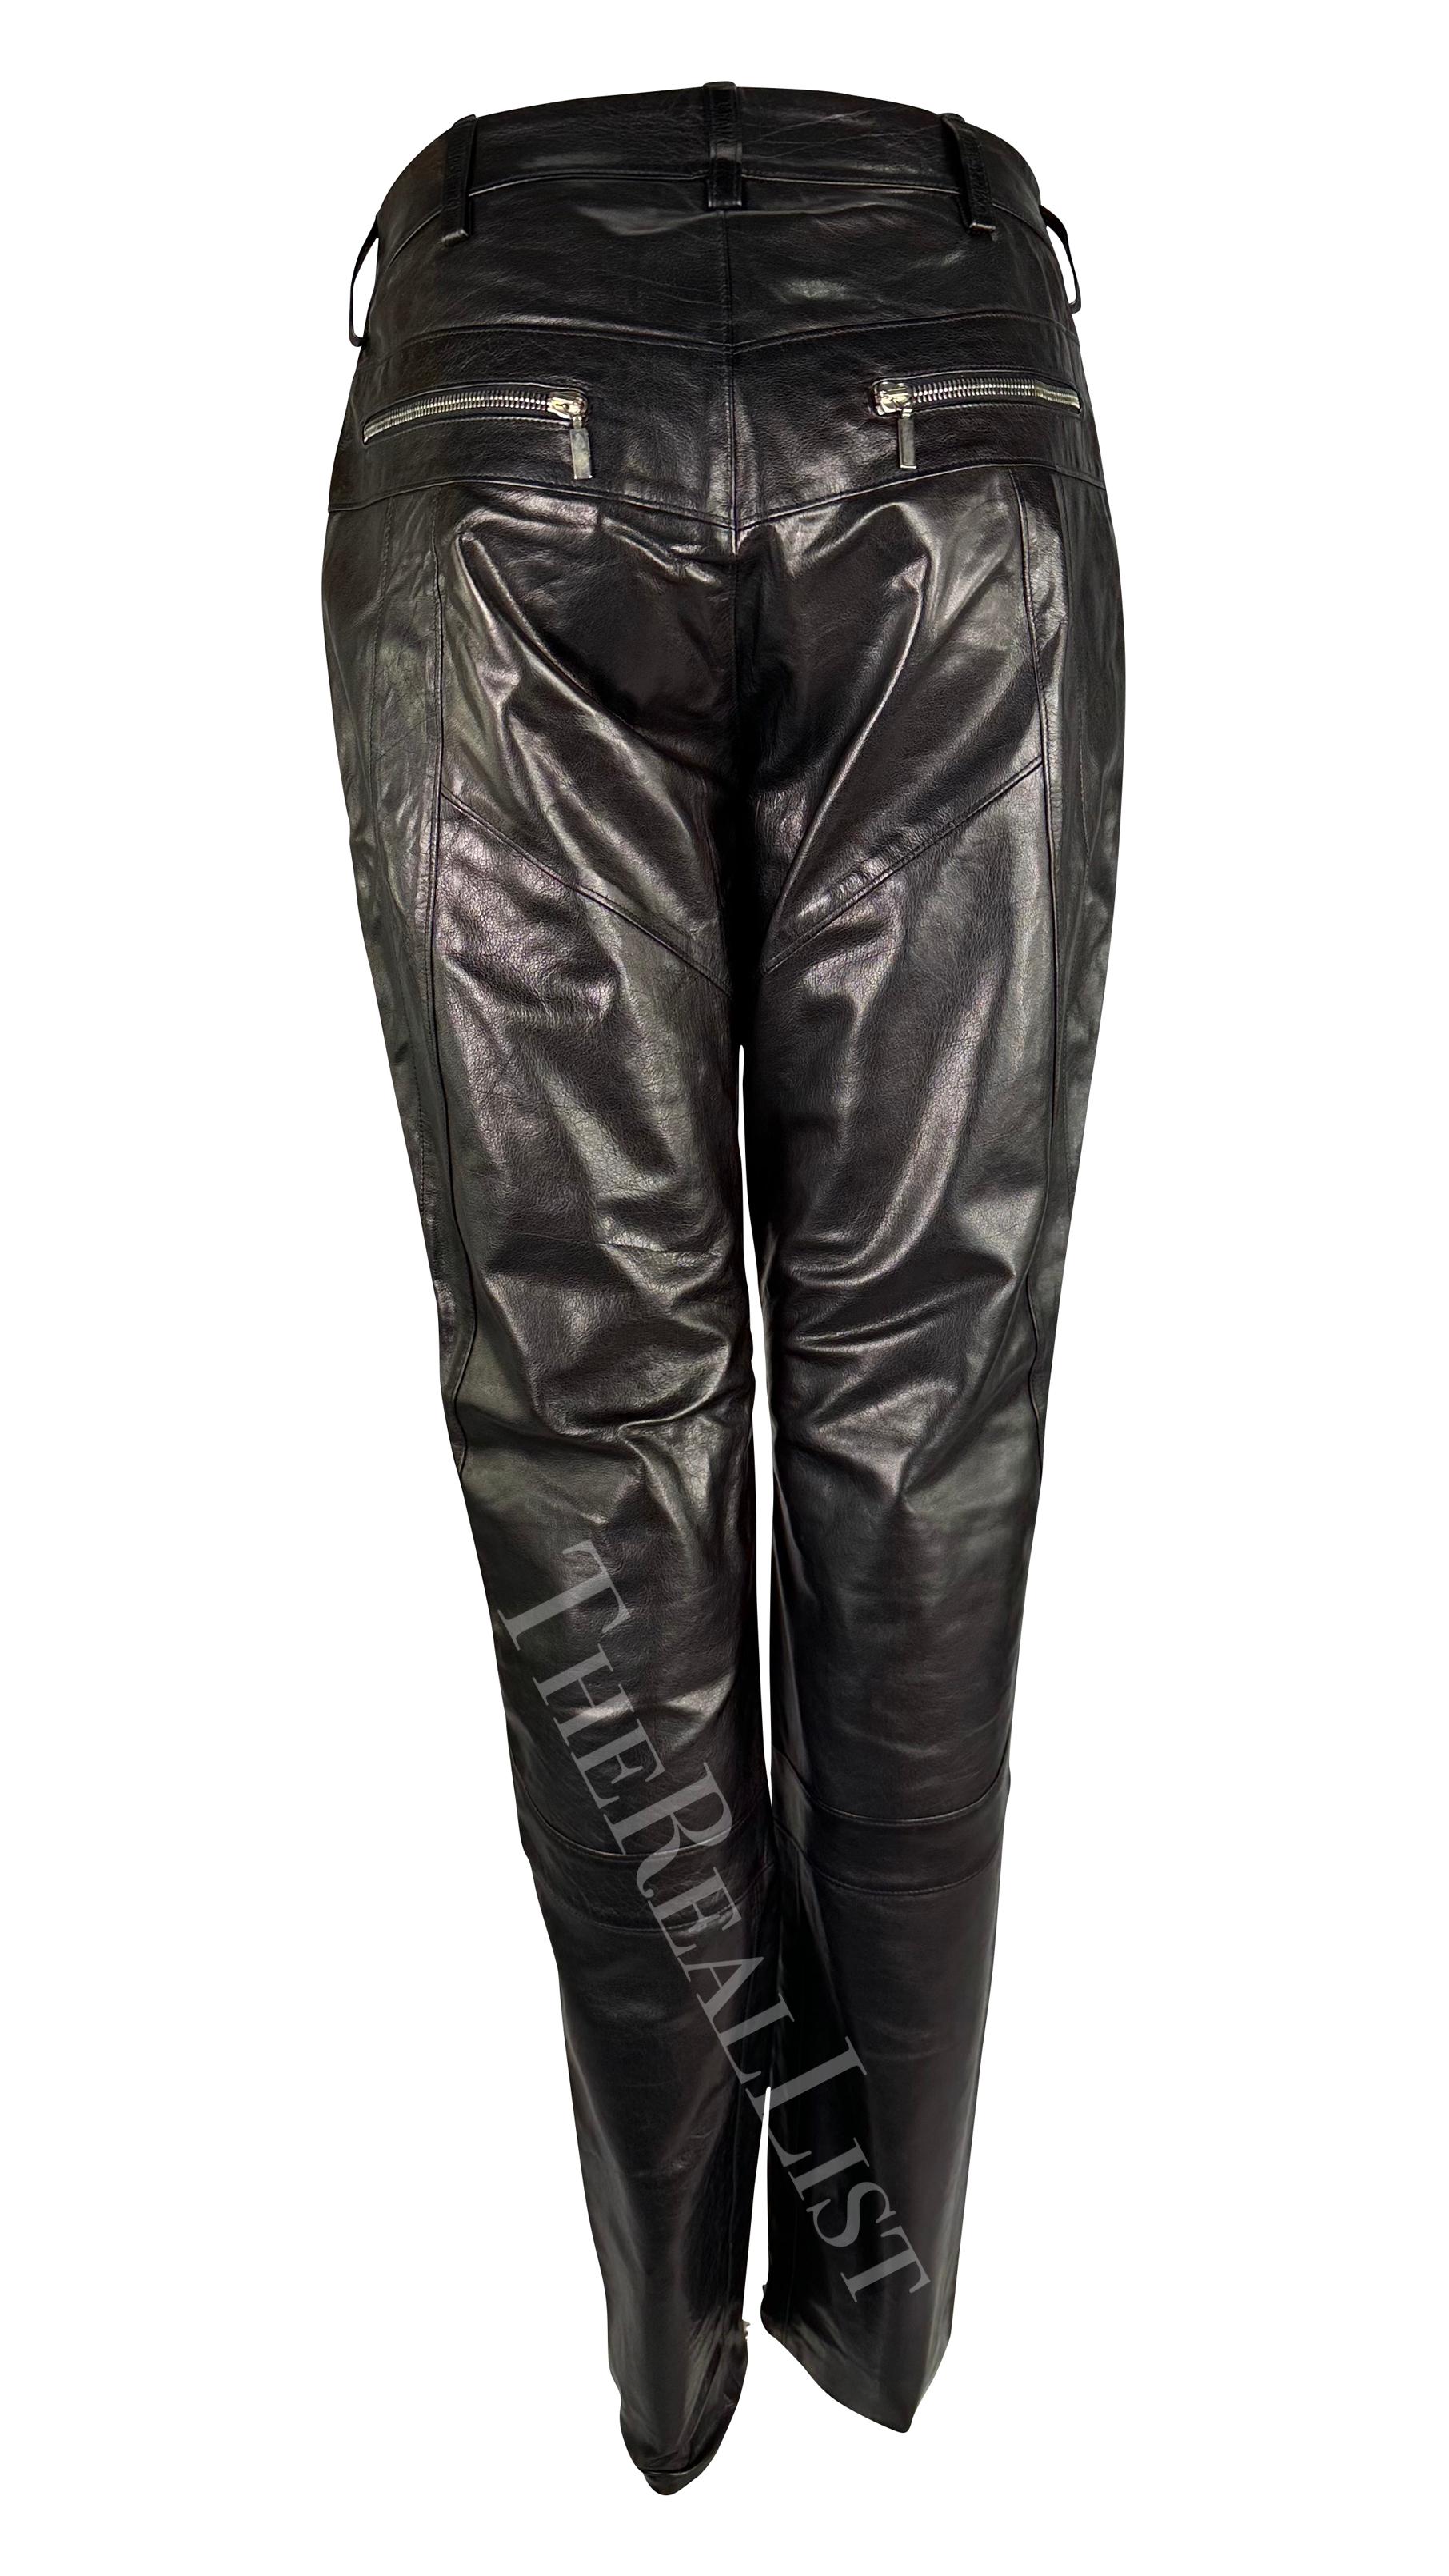 S/S 2002 Gianni Versace by Donatella Black Leather Moto Style Zip Pants For Sale 5